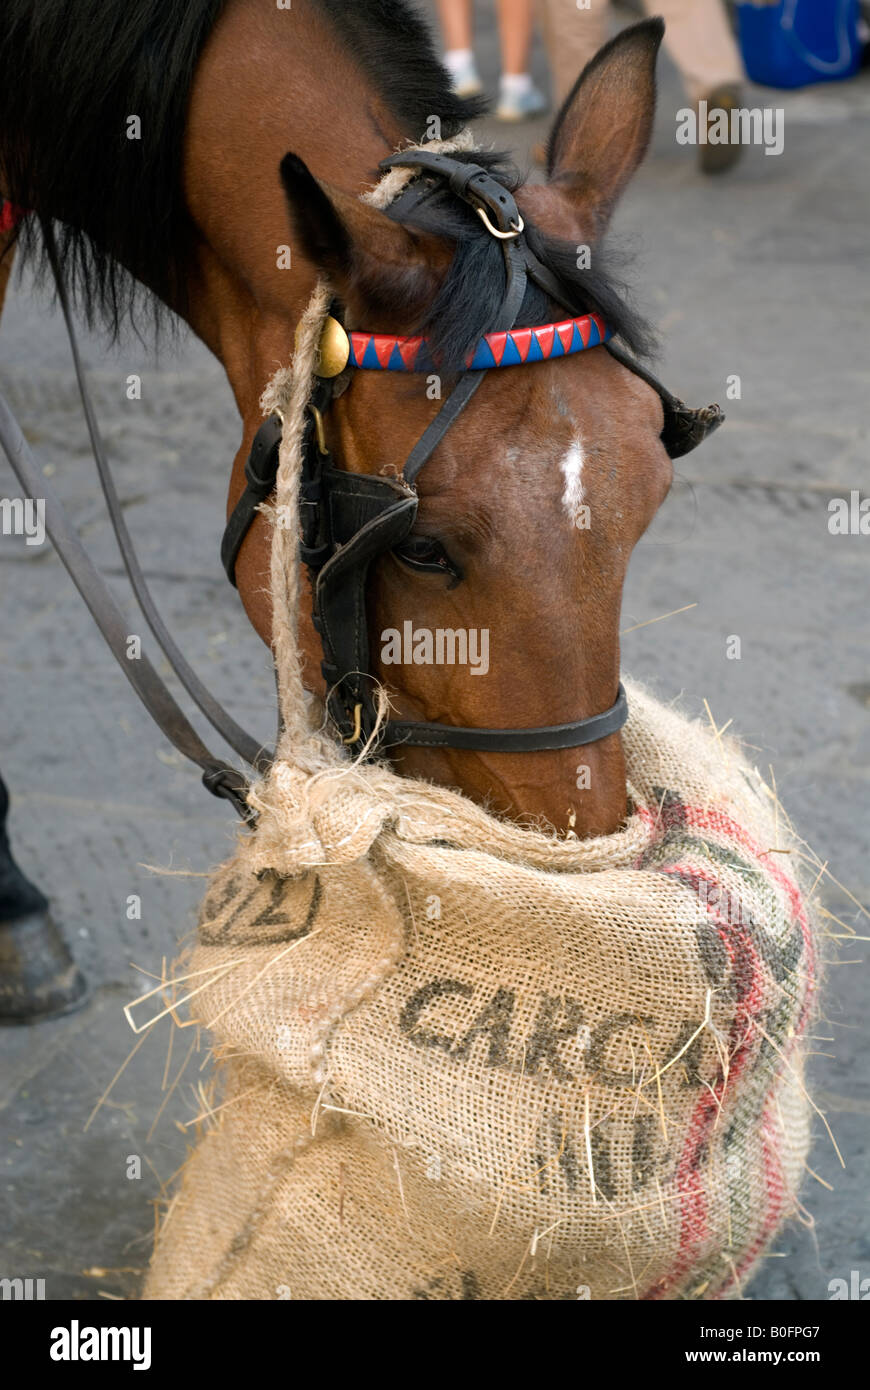 Horse eating from feed sack, Florence, Italy Stock Photo - Alamy